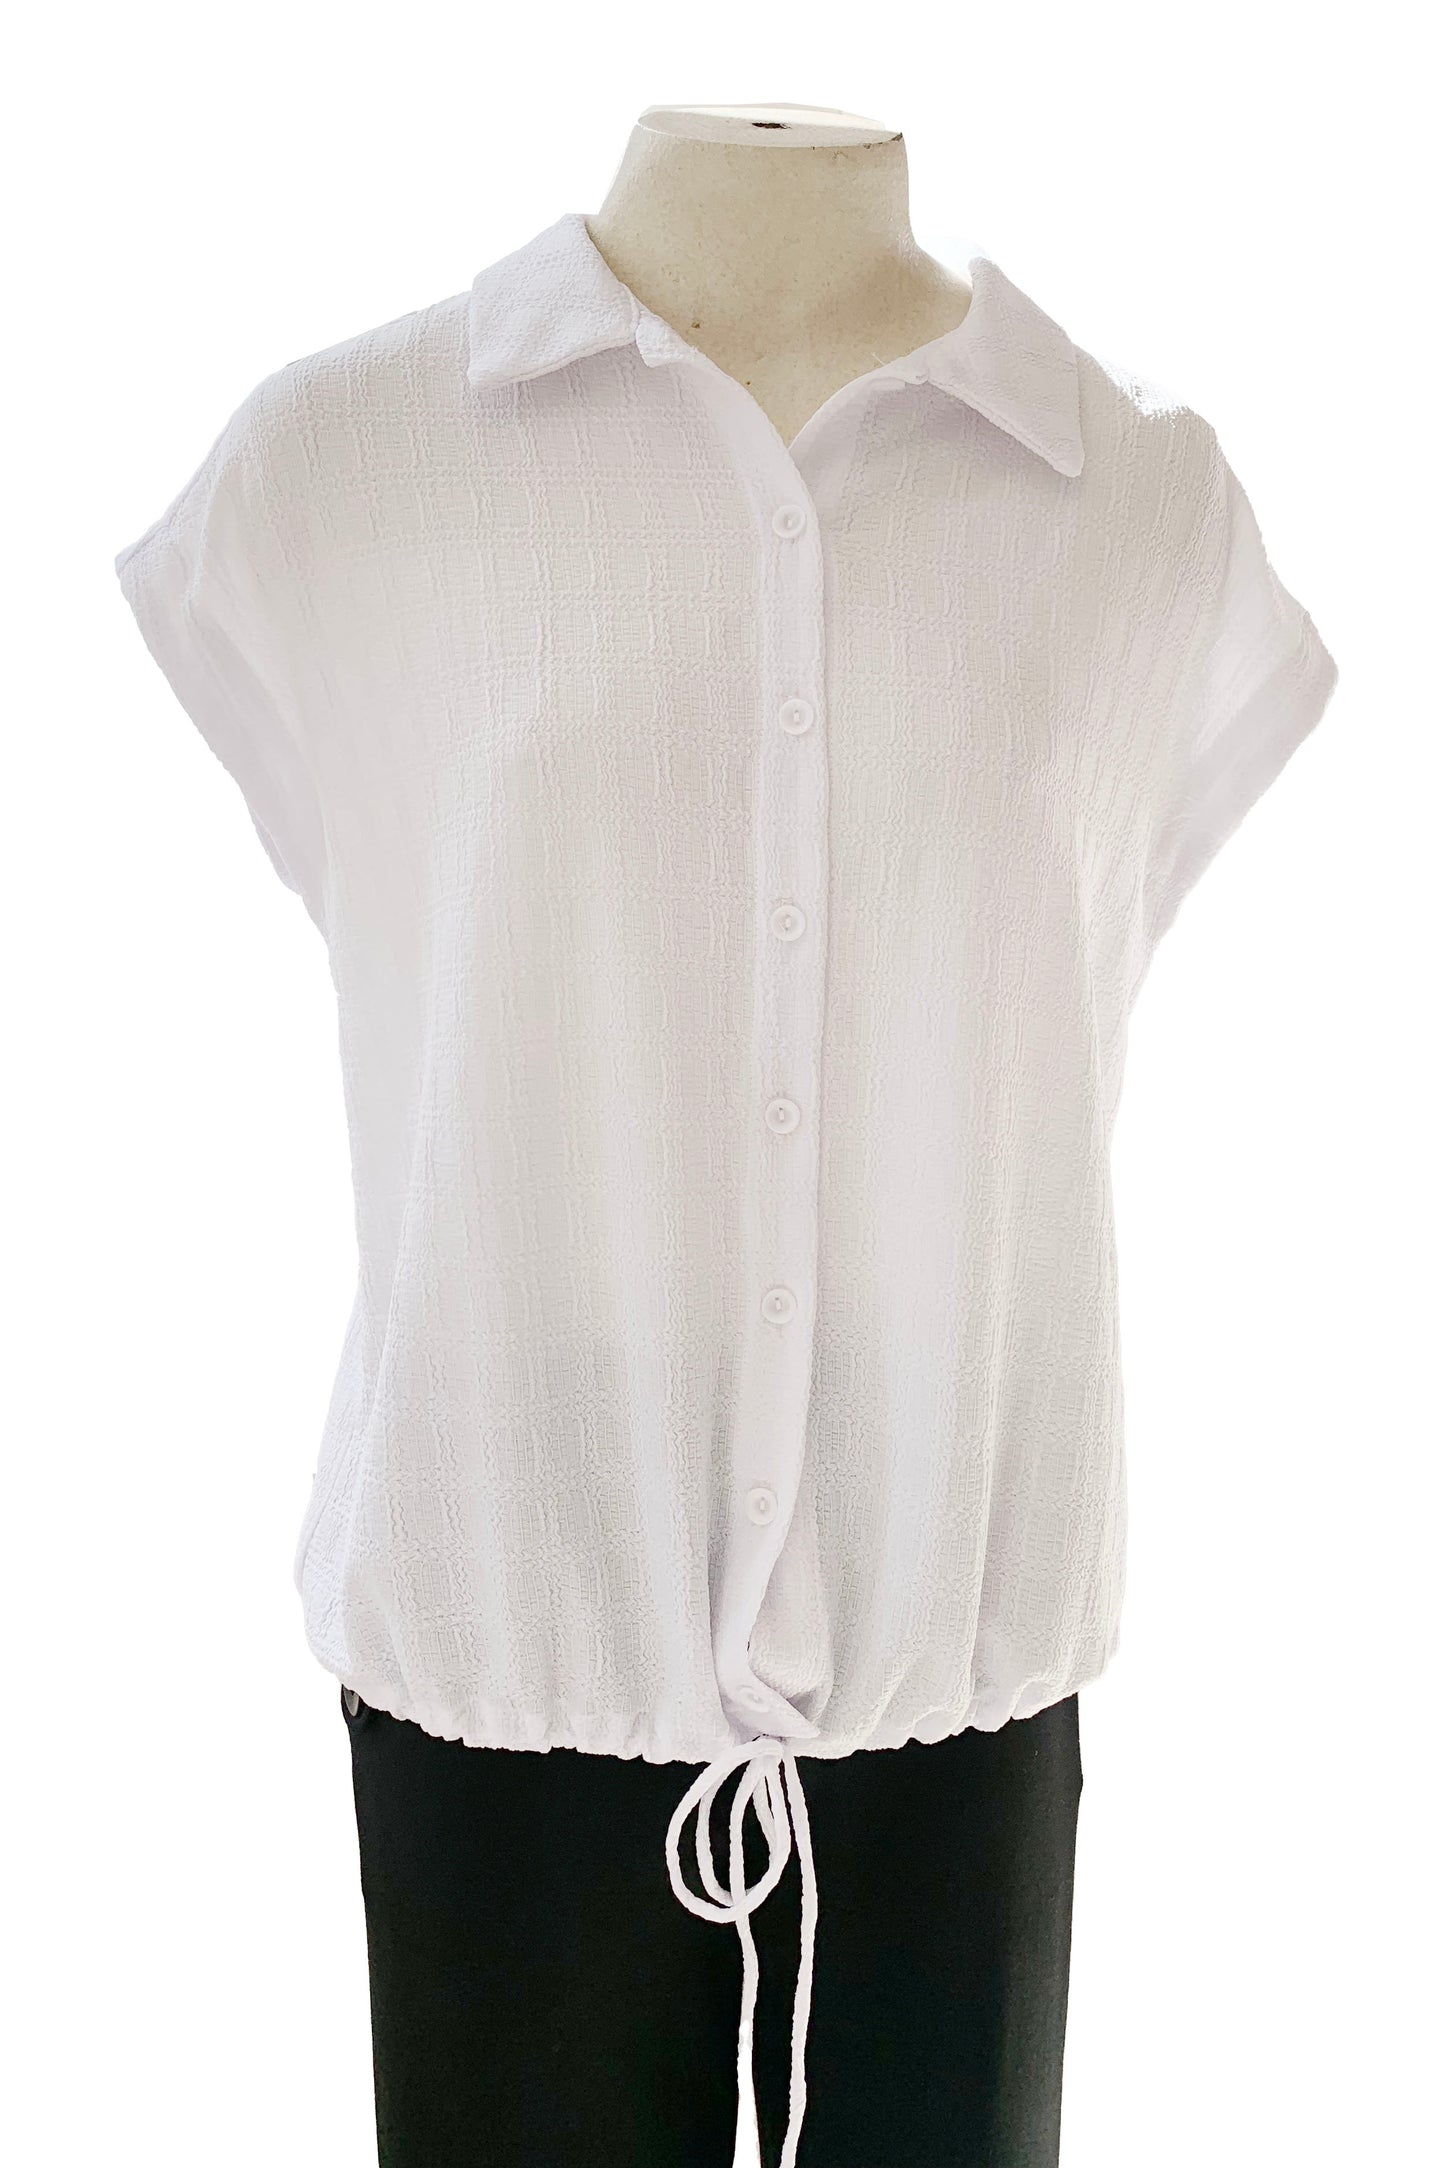 Candella Shirt by Pure Essence, White, classic collar, button front, short extended sleeves, drawstring waist, subtle checkered texture, sizes XS to XXL, made in Canada